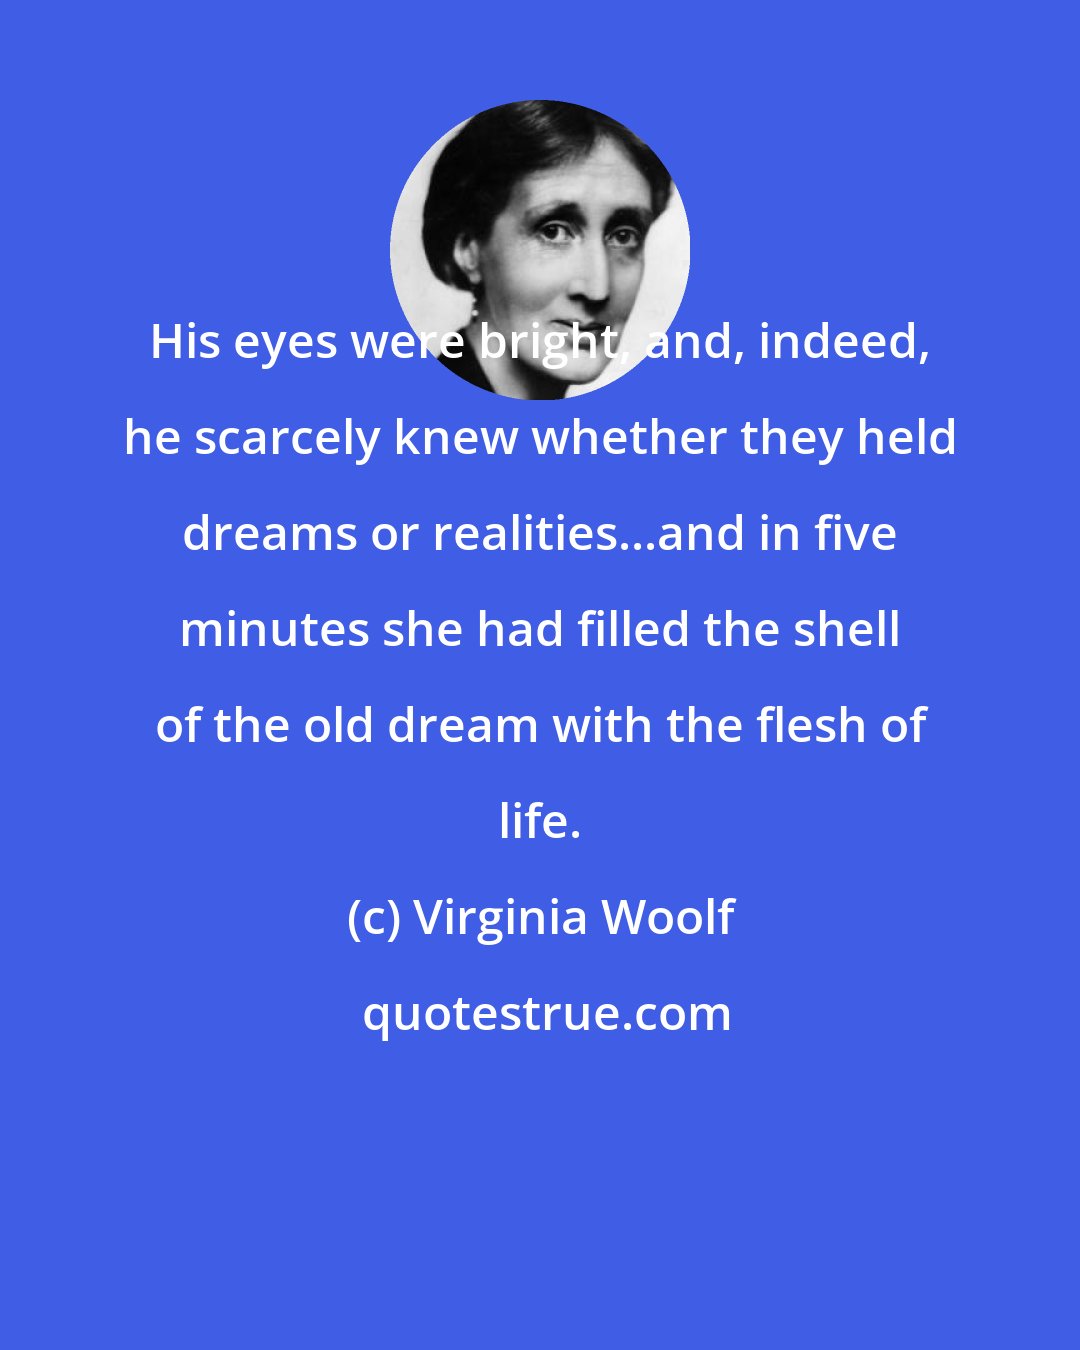 Virginia Woolf: His eyes were bright, and, indeed, he scarcely knew whether they held dreams or realities...and in five minutes she had filled the shell of the old dream with the flesh of life.